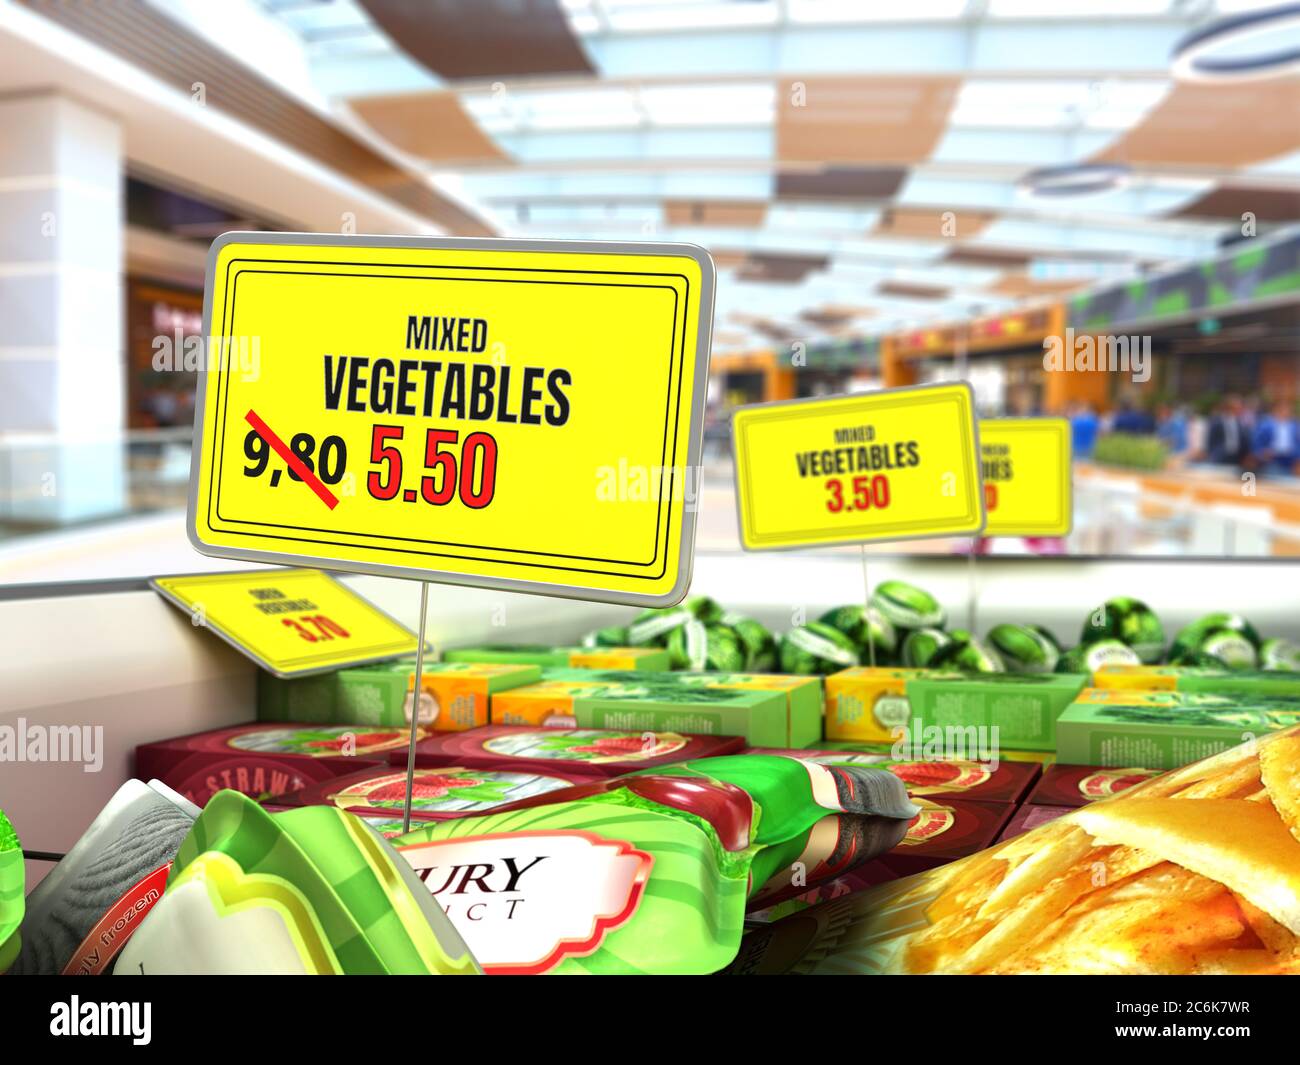 Reduced Food Prices